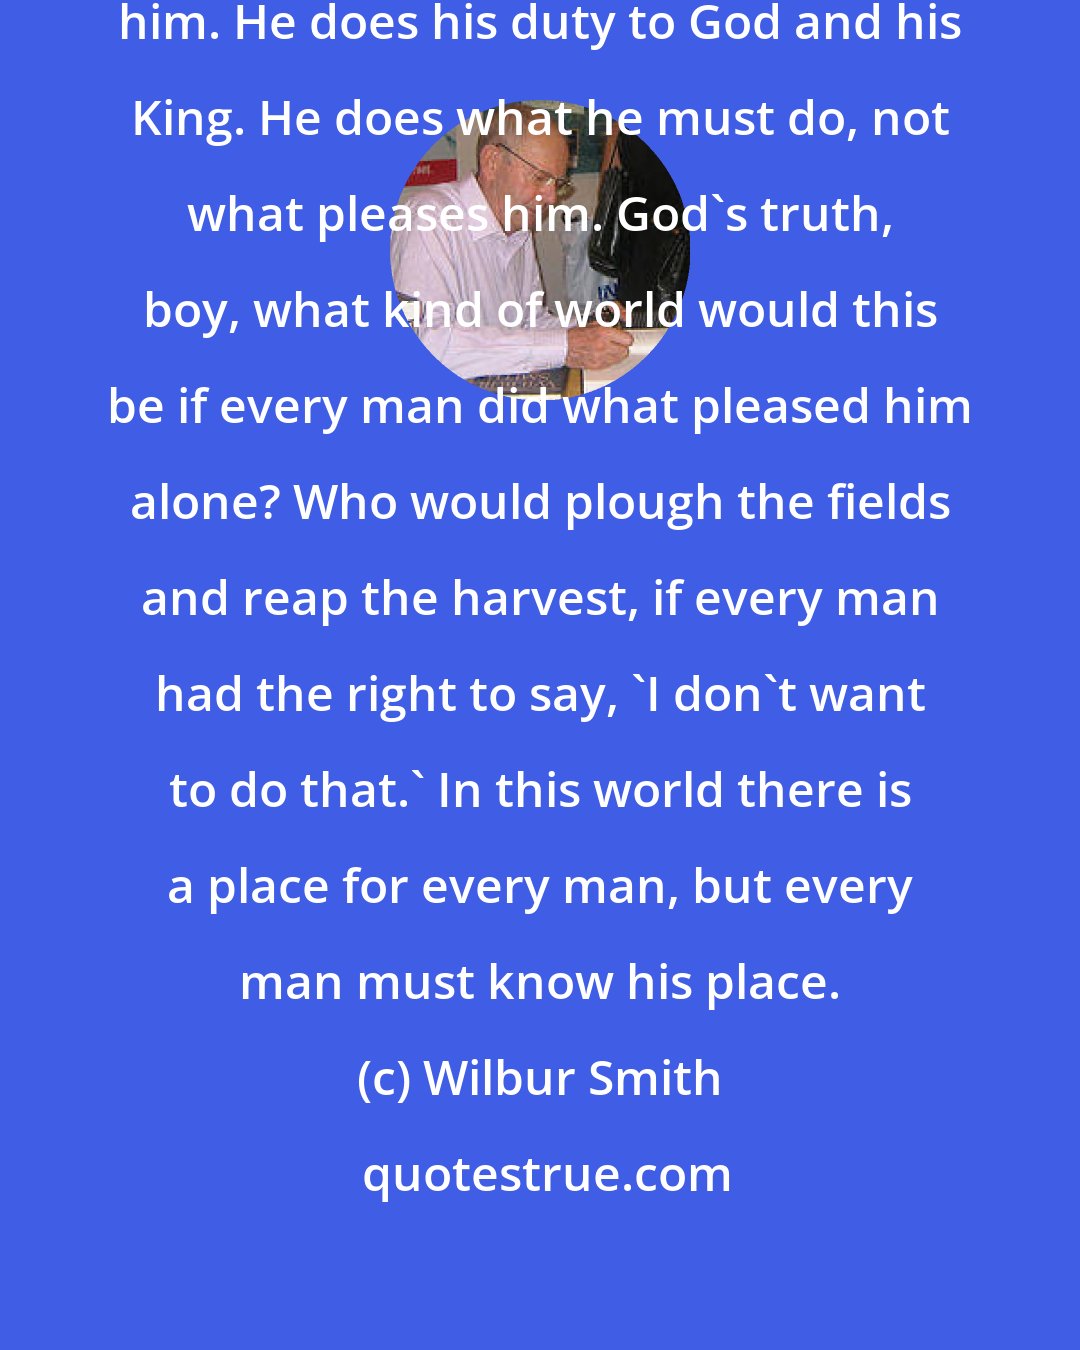 Wilbur Smith: A man follows the path laid out for him. He does his duty to God and his King. He does what he must do, not what pleases him. God's truth, boy, what kind of world would this be if every man did what pleased him alone? Who would plough the fields and reap the harvest, if every man had the right to say, 'I don't want to do that.' In this world there is a place for every man, but every man must know his place.